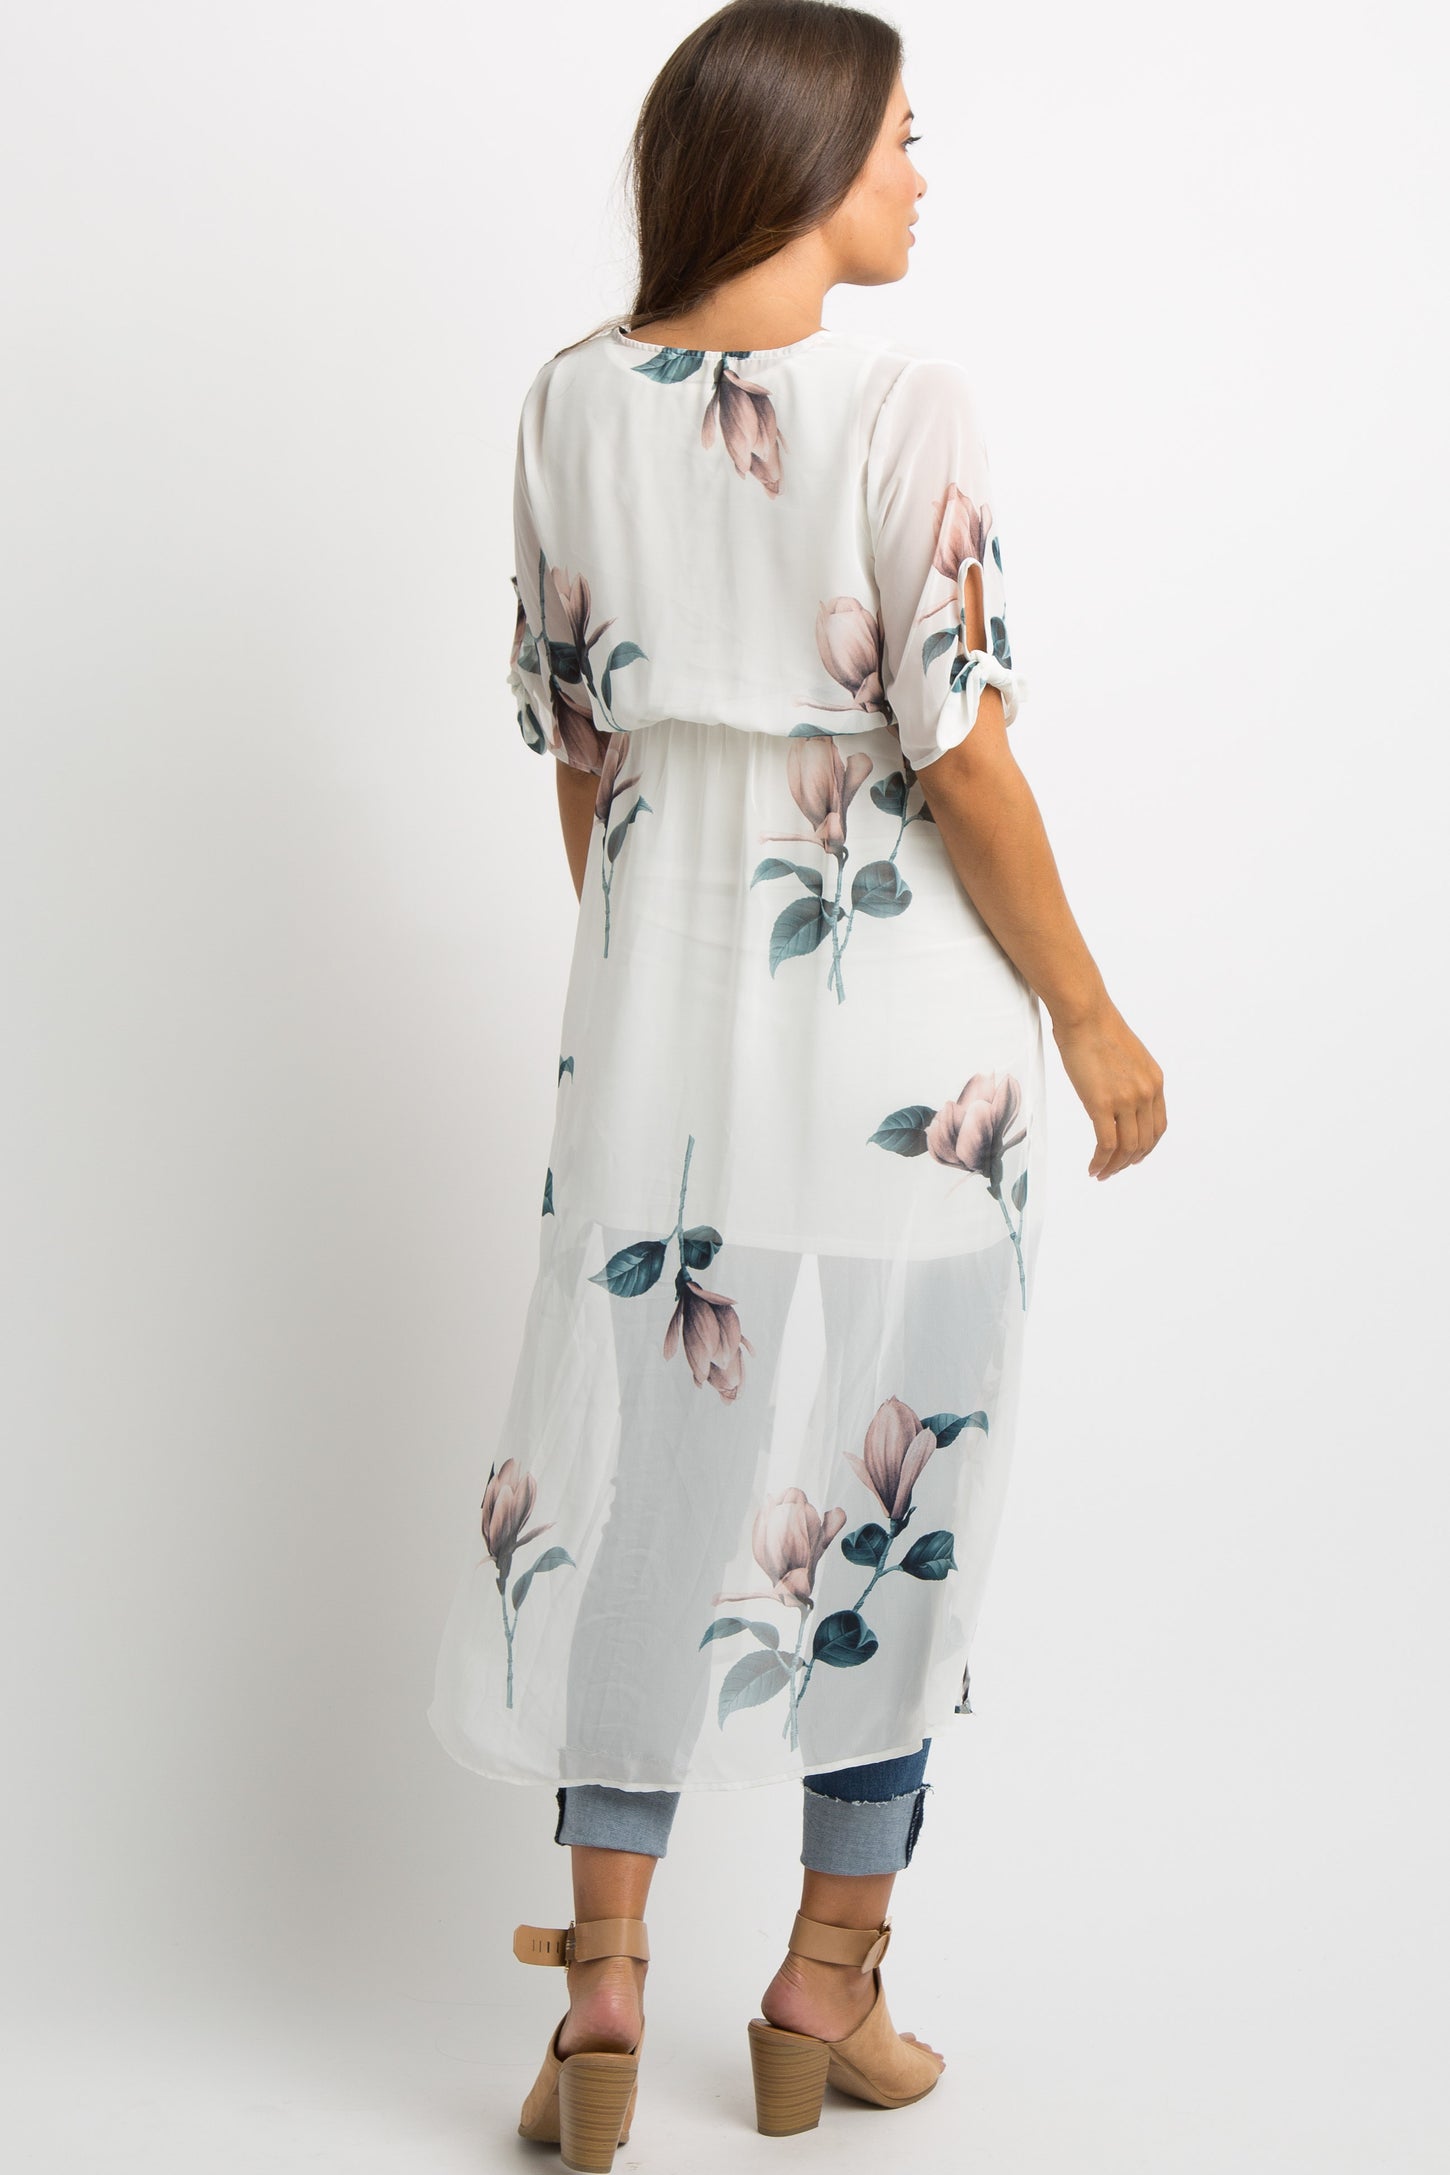 Cream Floral Chiffon Tie Accent Long Maternity Cover Up